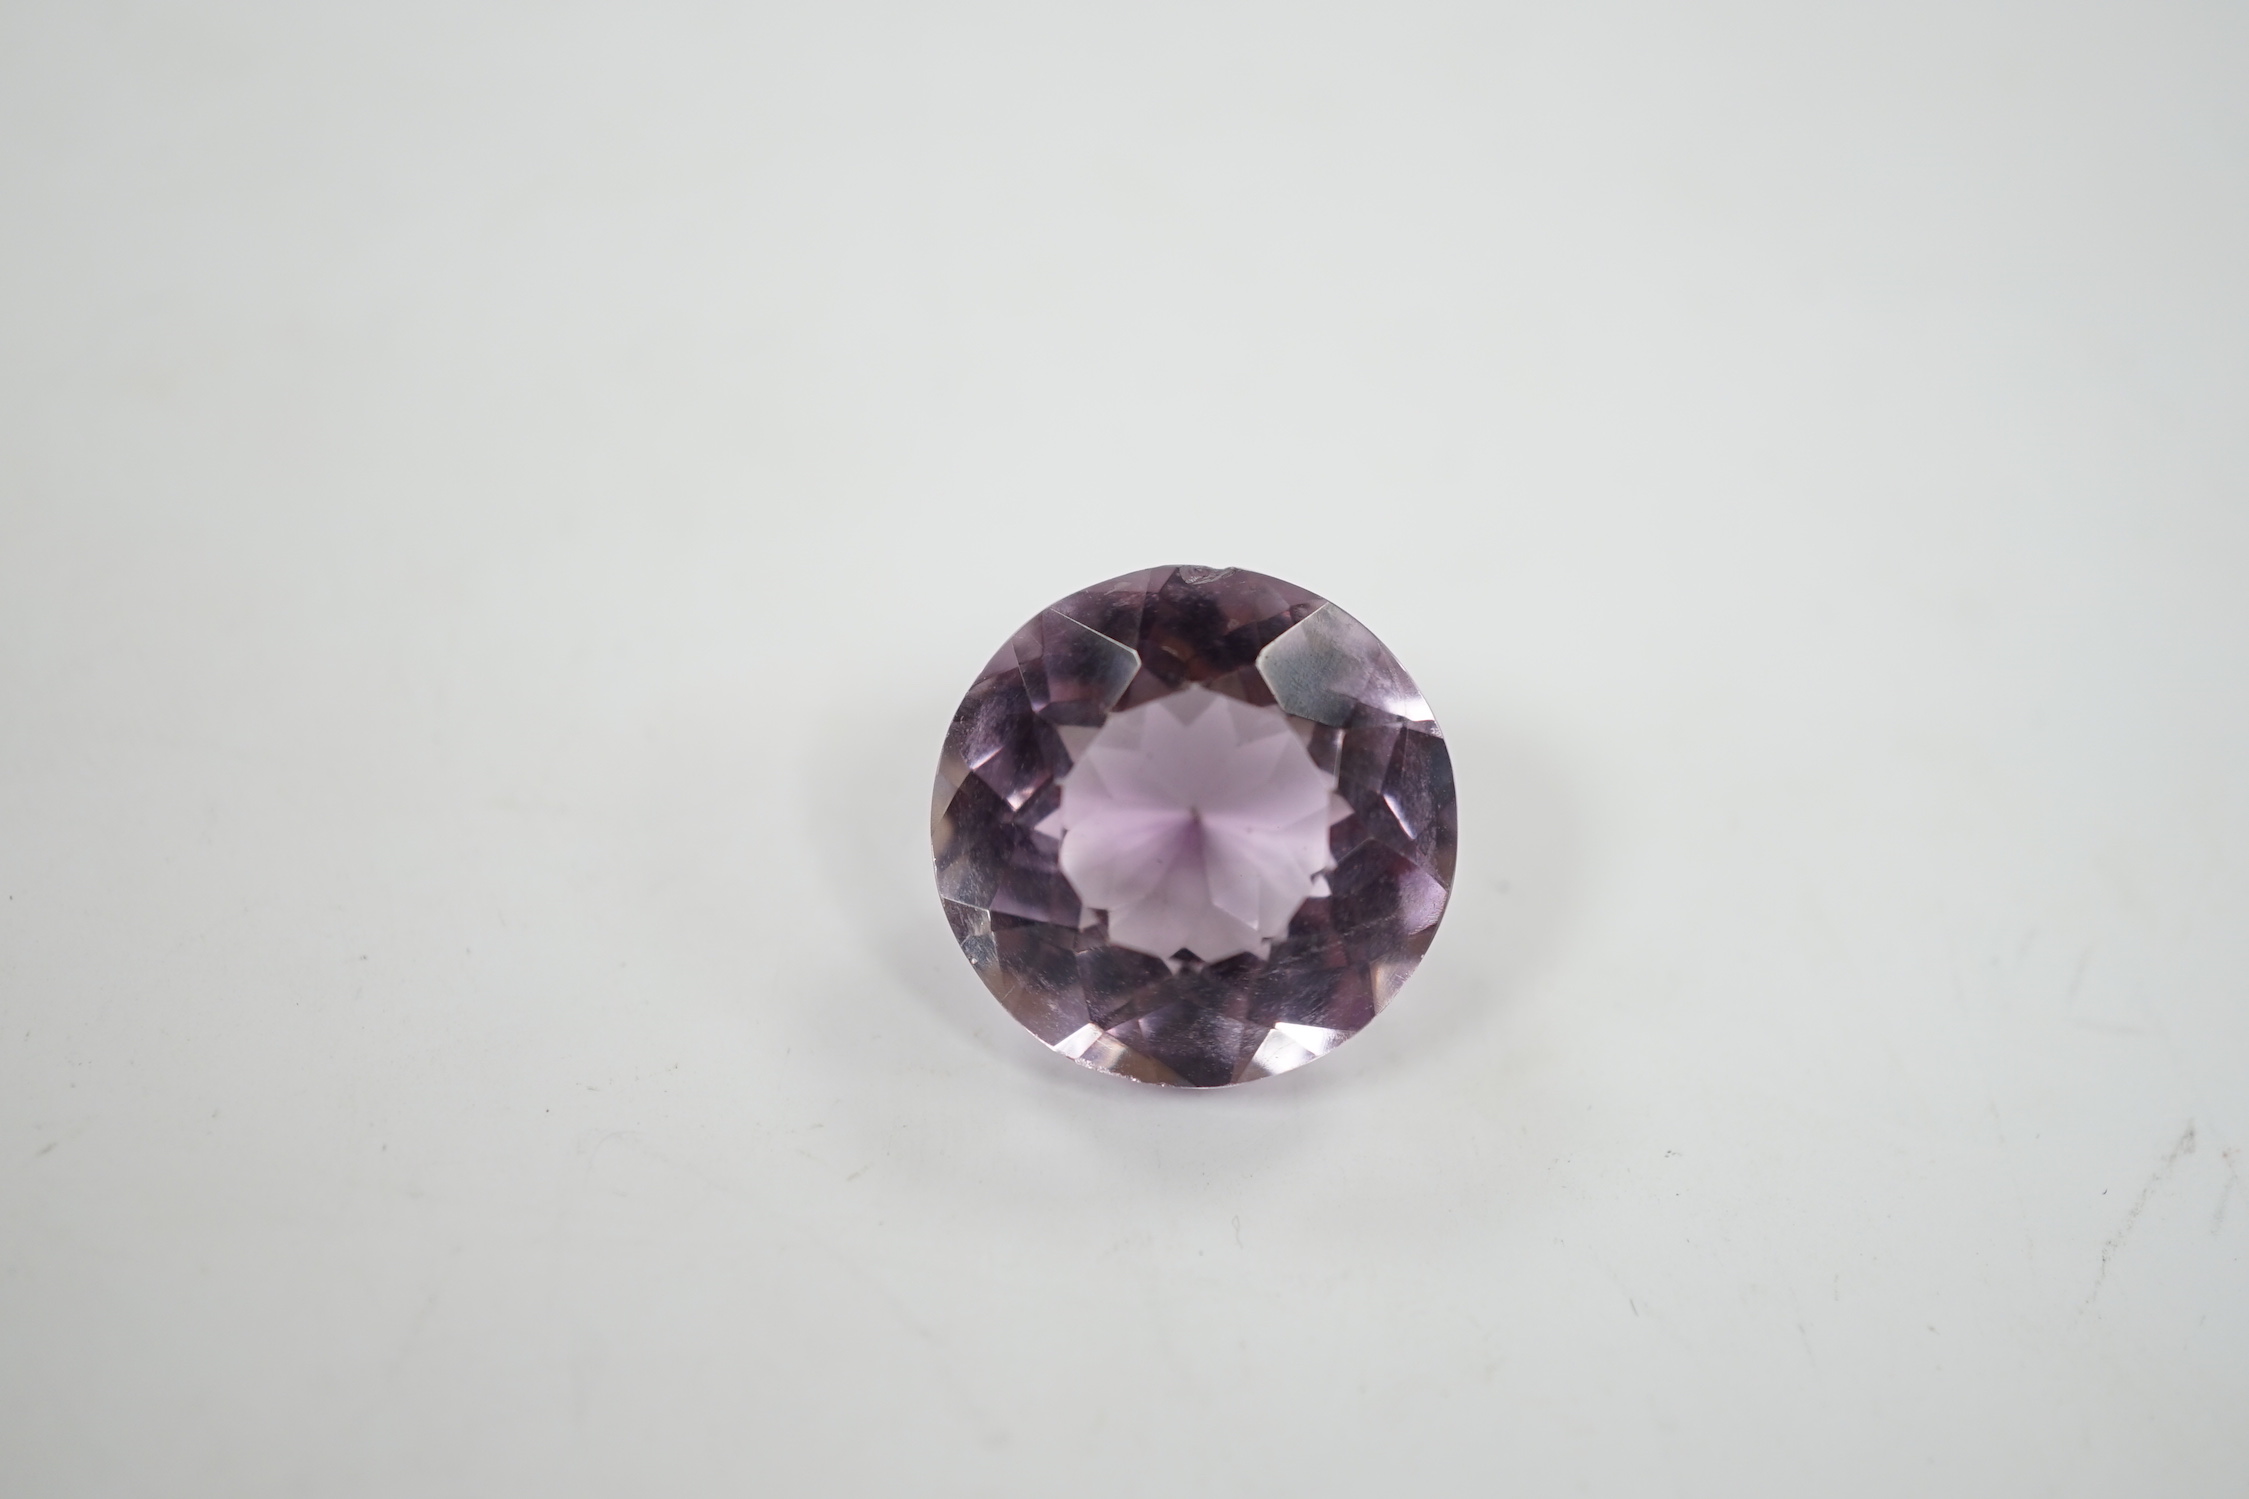 An unmounted round cut amethyst, weighing approximately 15.9ct.